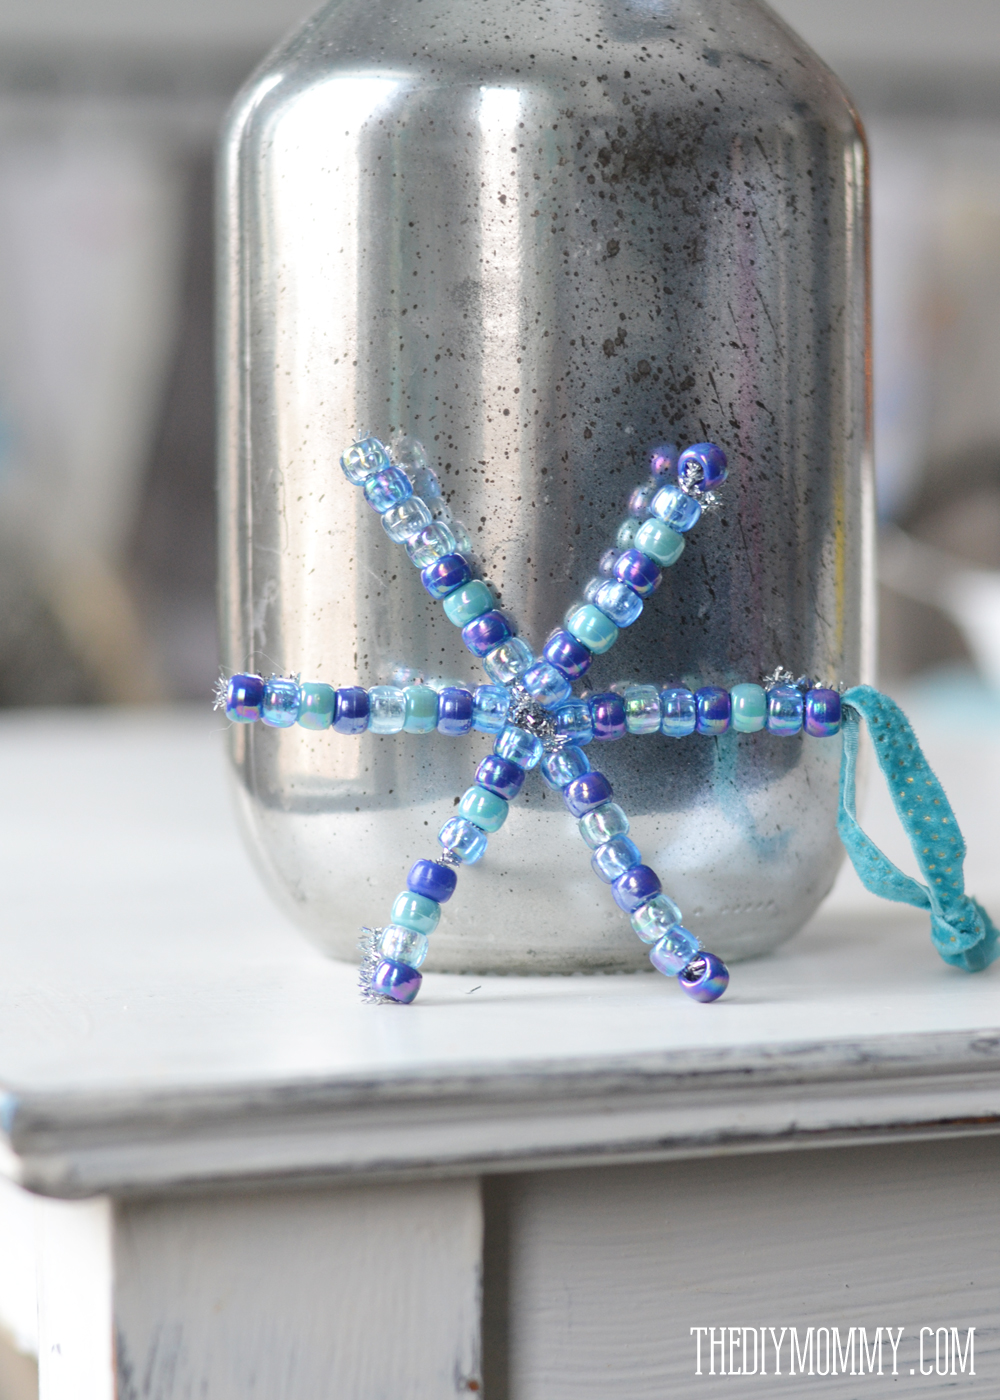 DIY Christmas Ornament: A Pipe Cleaner and Beads Snowflake (A Kid’s Craft)